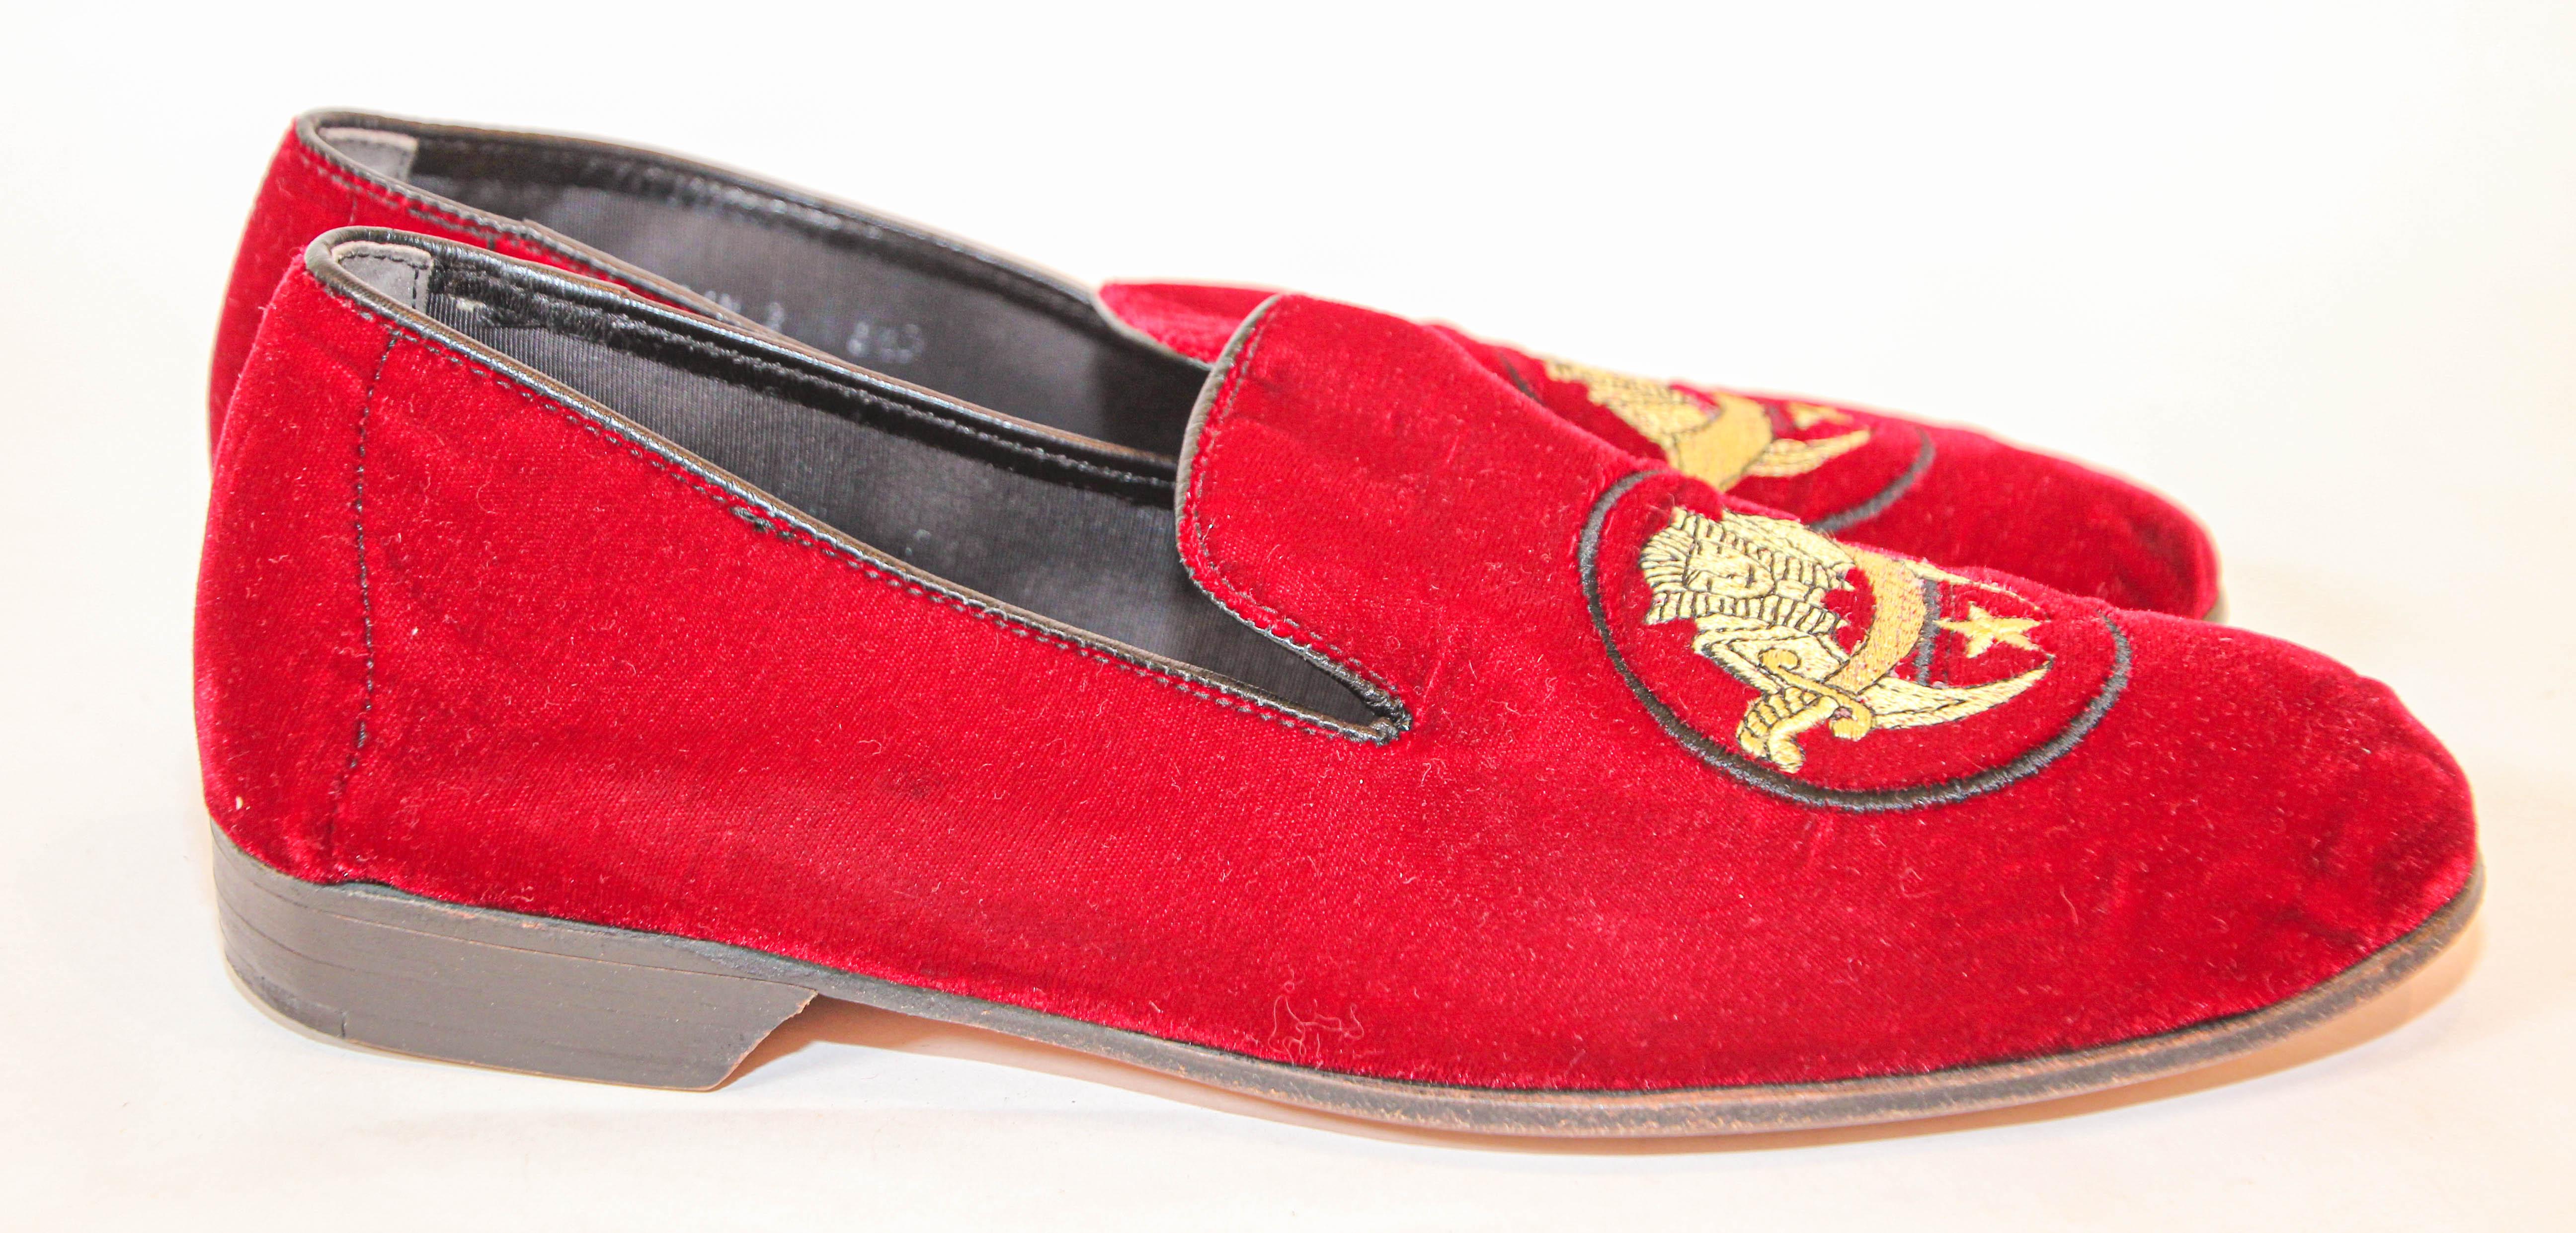 Shriner Red Velvet Shoes Embroidery Loafers Slip On Size 8.5 For Sale 3